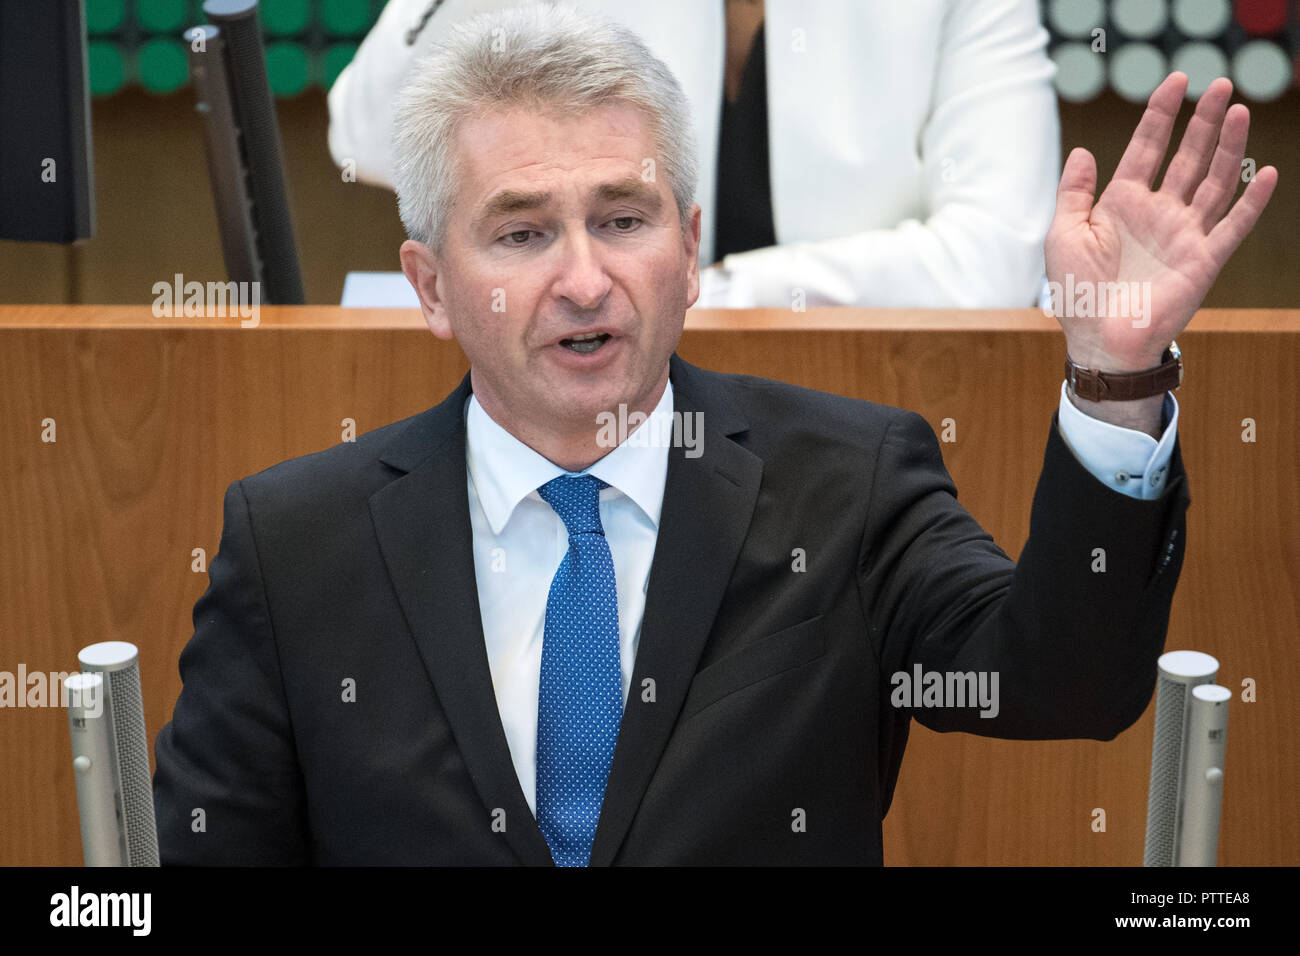 11 October 2018, North Rhine-Westphalia, Duesseldorf: Andreas Pinkwart (FDP), Economics Minister of North Rhine-Westphalia, will speak during the debate in the state parliament. The state parliament debated structural change and structural support in the Rhineland lignite mining area. Photo: Federico Gambarini/dpa Stock Photo